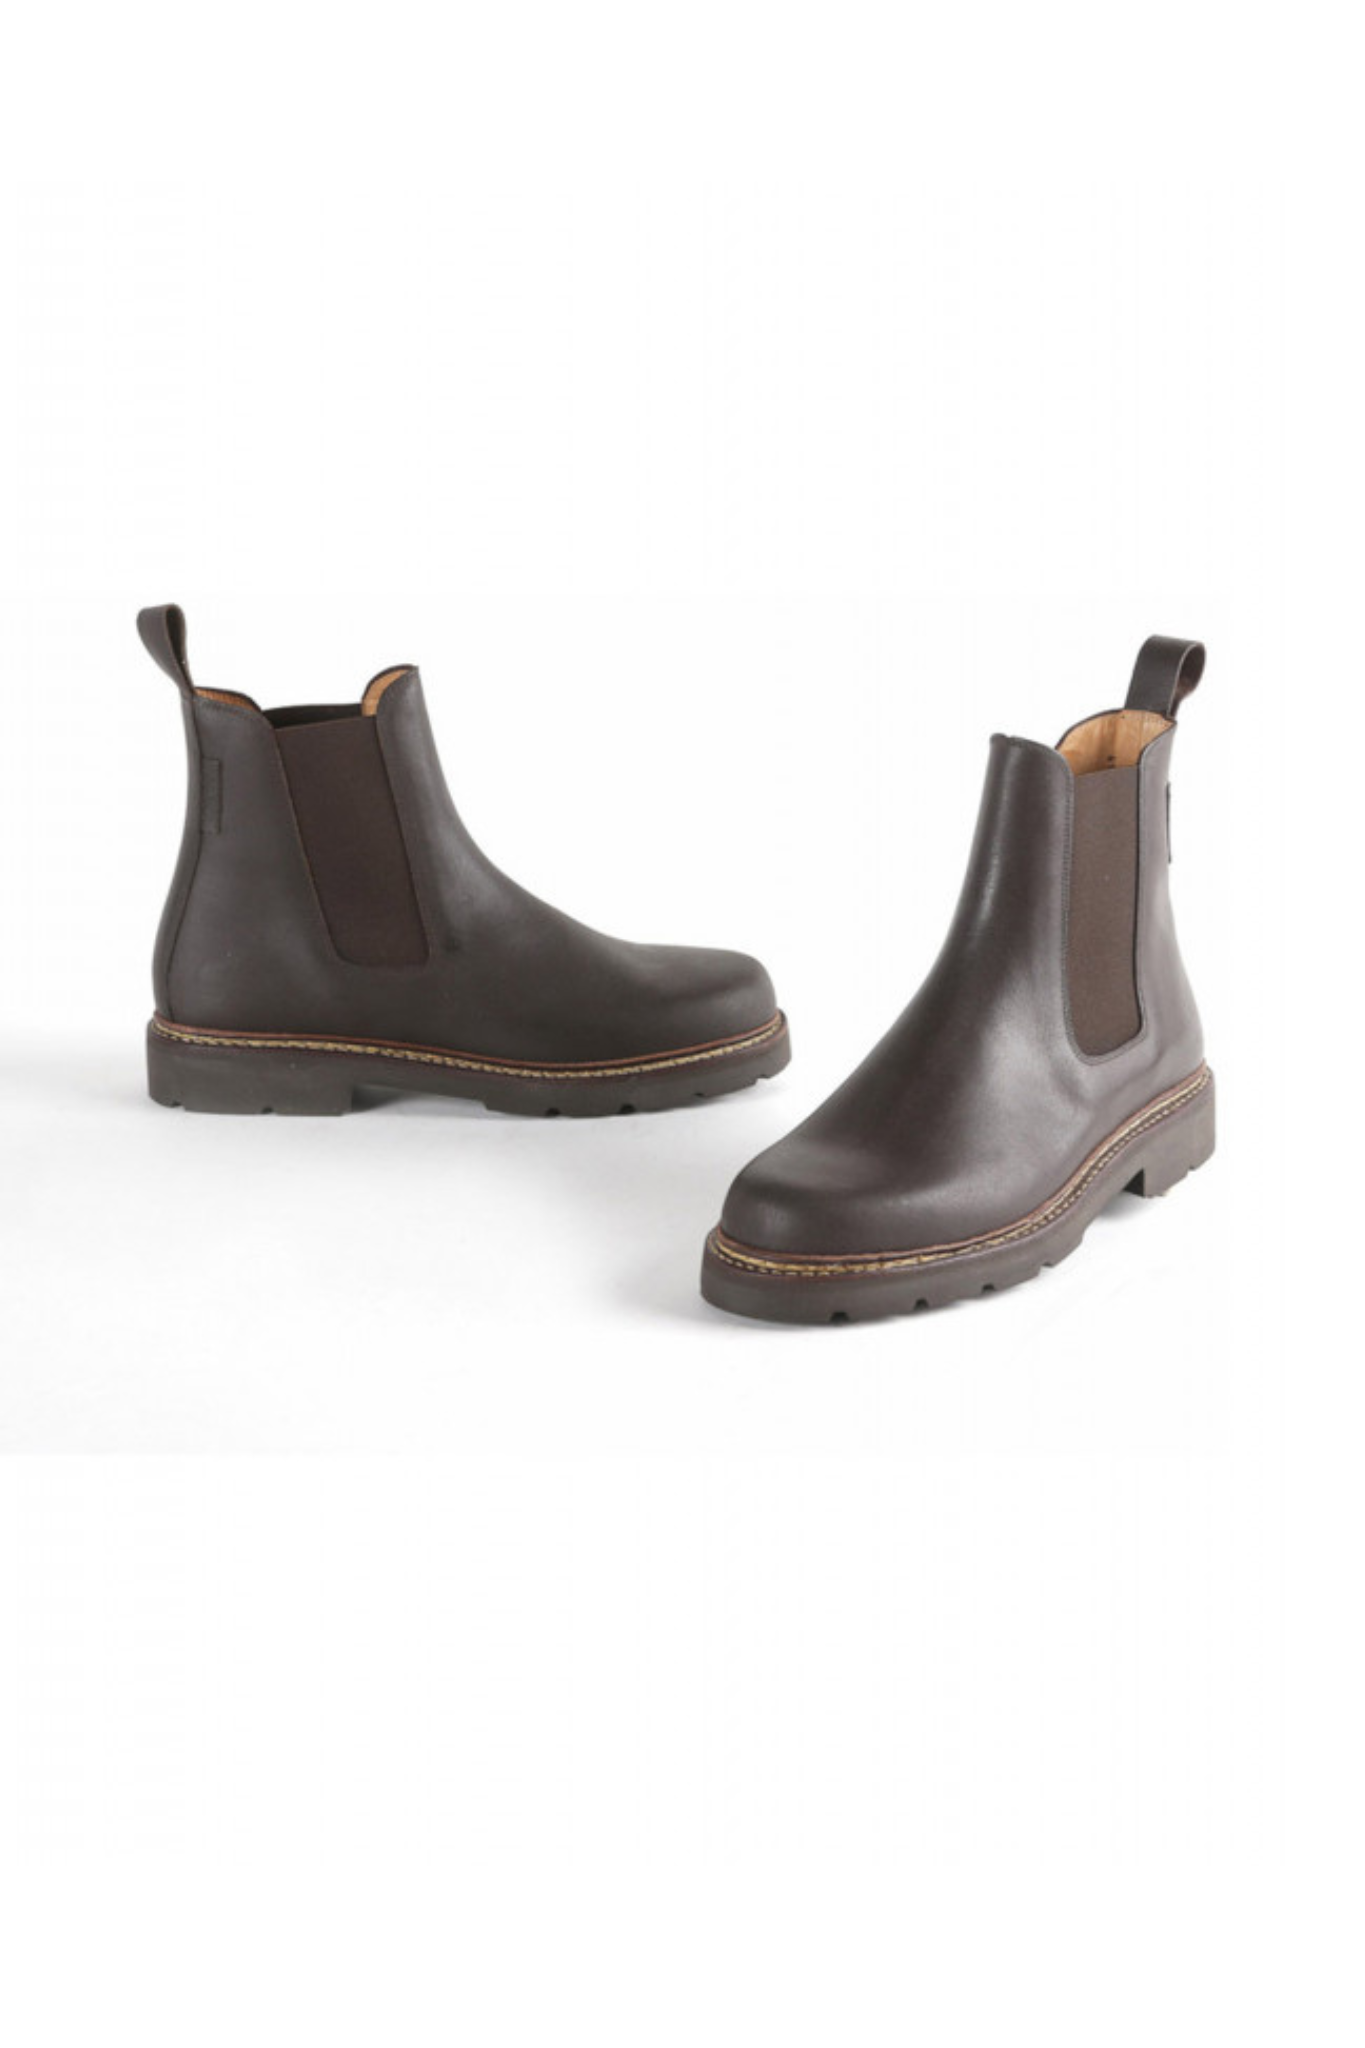 Aigle Quercy Brown Leather Workboots